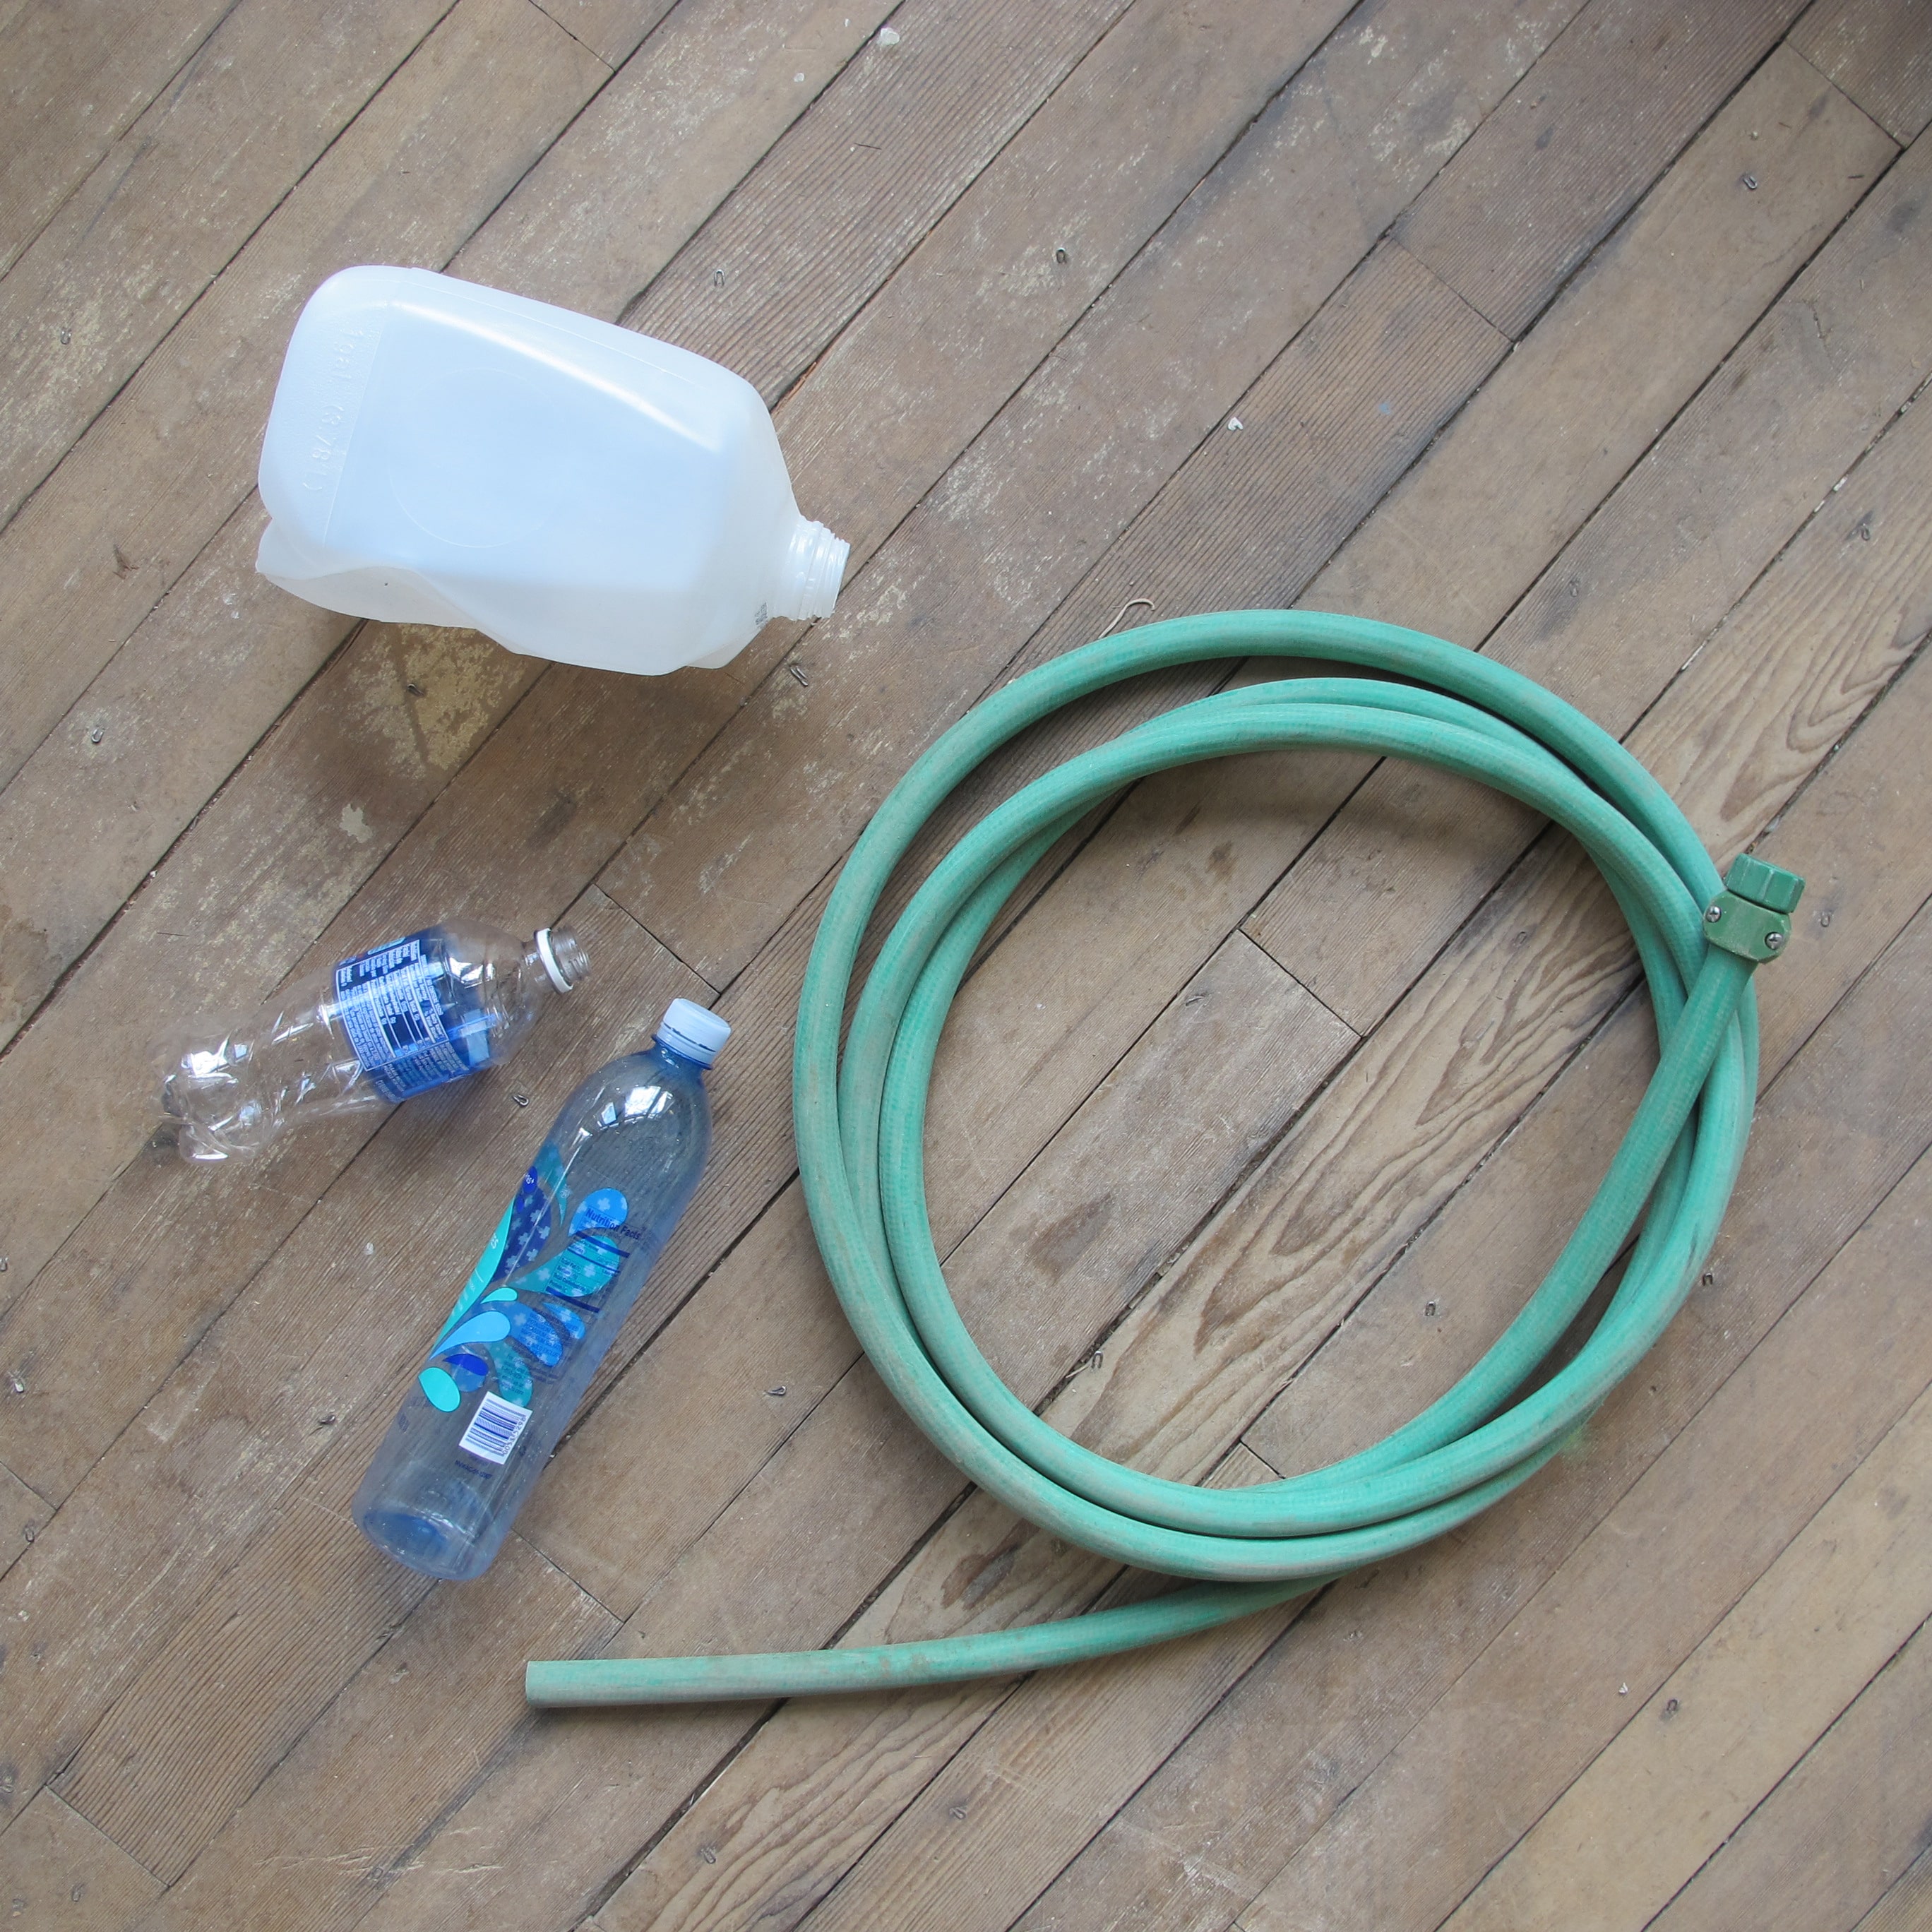 DIY Water Systems